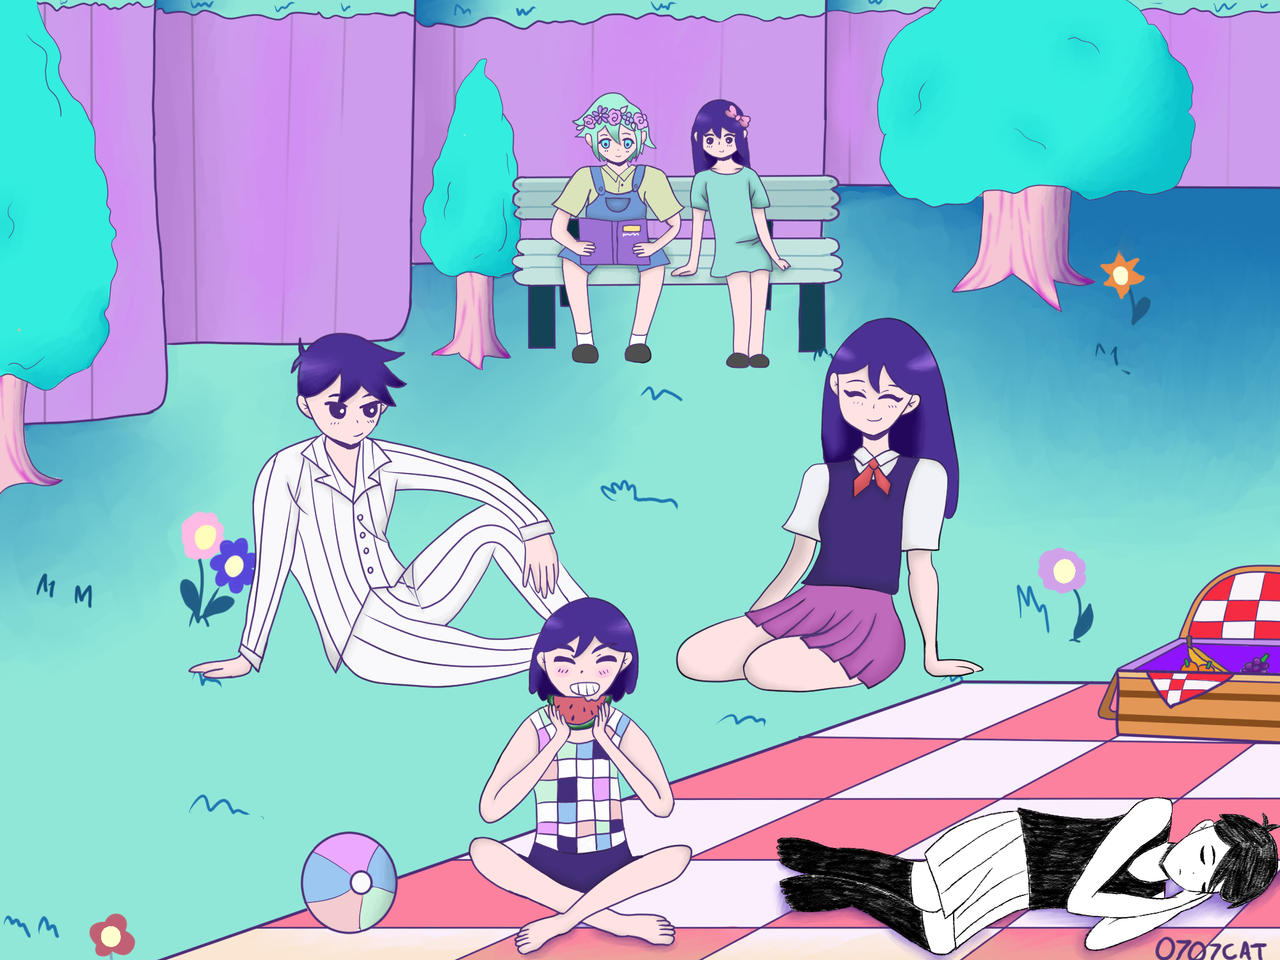 Omori fanart- picnic with friends by 0707cat on DeviantArt